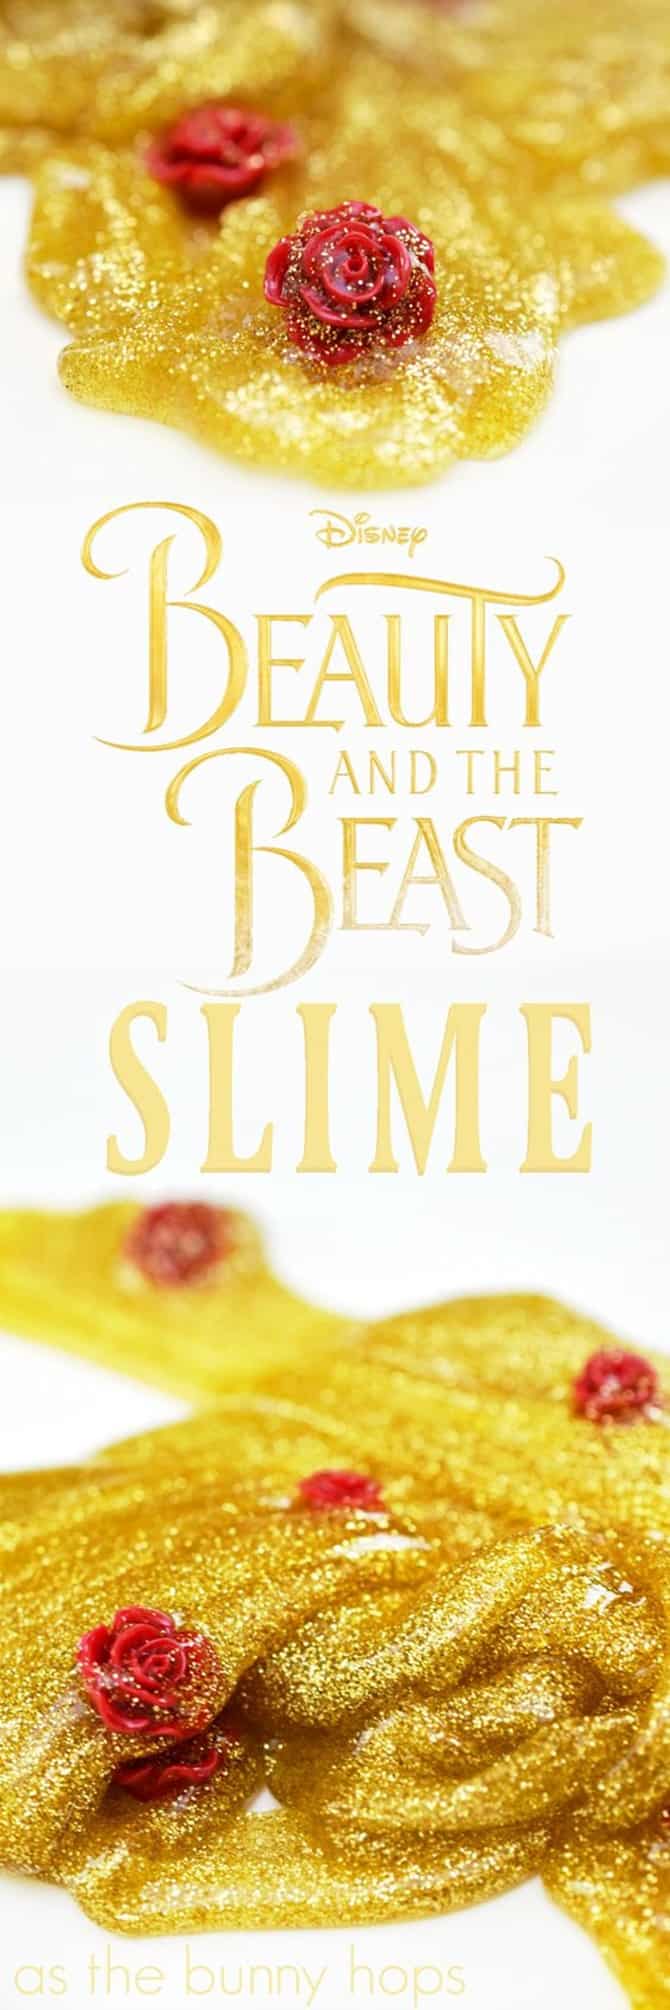 Beauth and The Beast slime